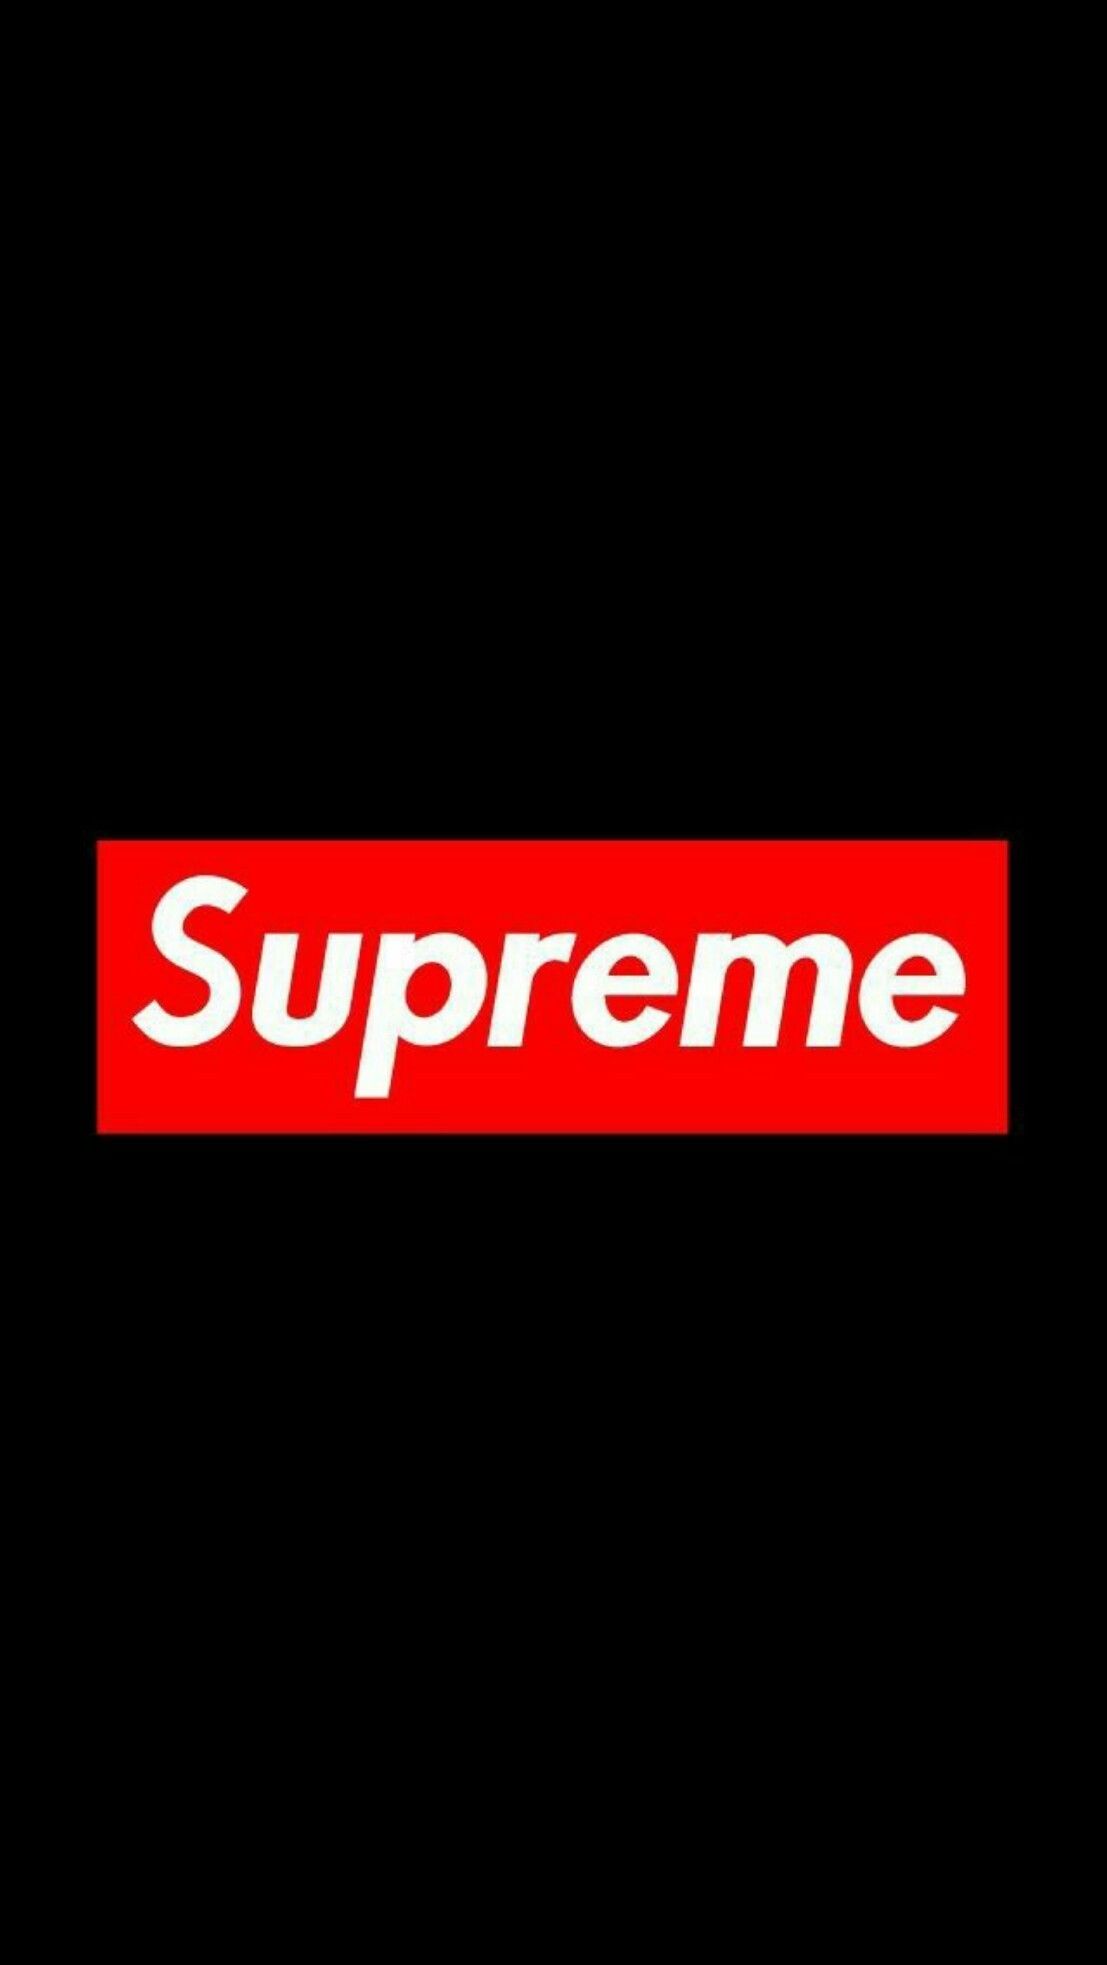 Supreme nad Gucci wallpaper by Qveen_MilQ - Download on ZEDGE